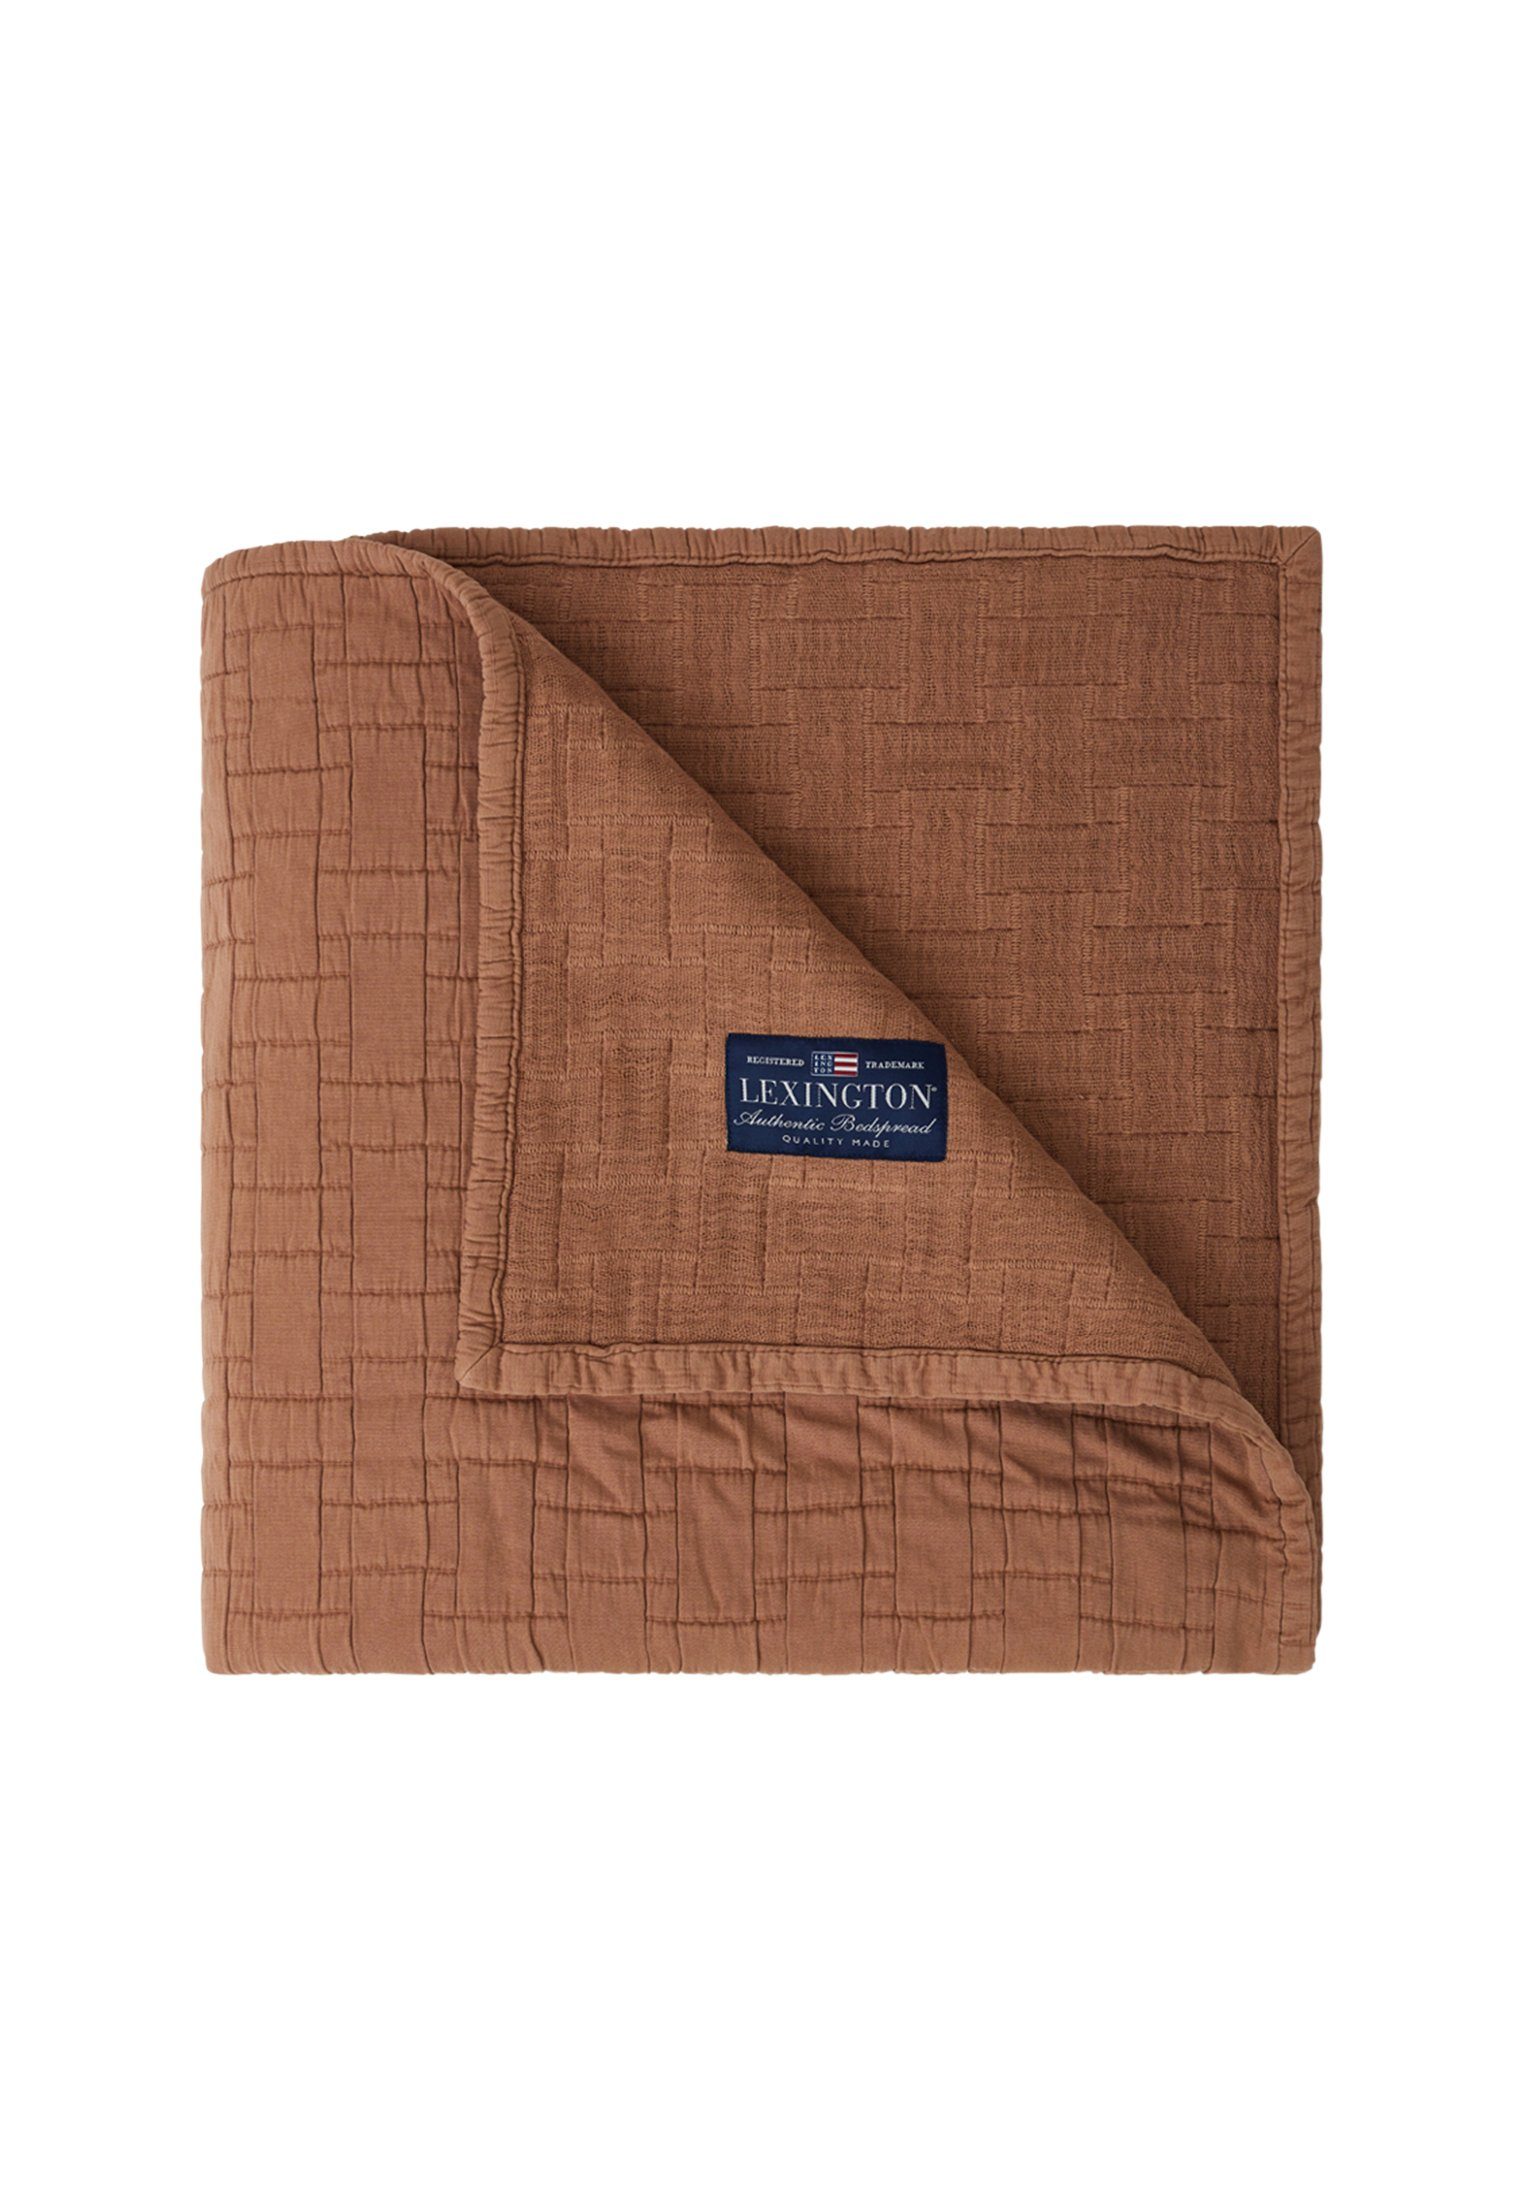 Tagesdecke Basket Structured Cotton, Lexington mid brown